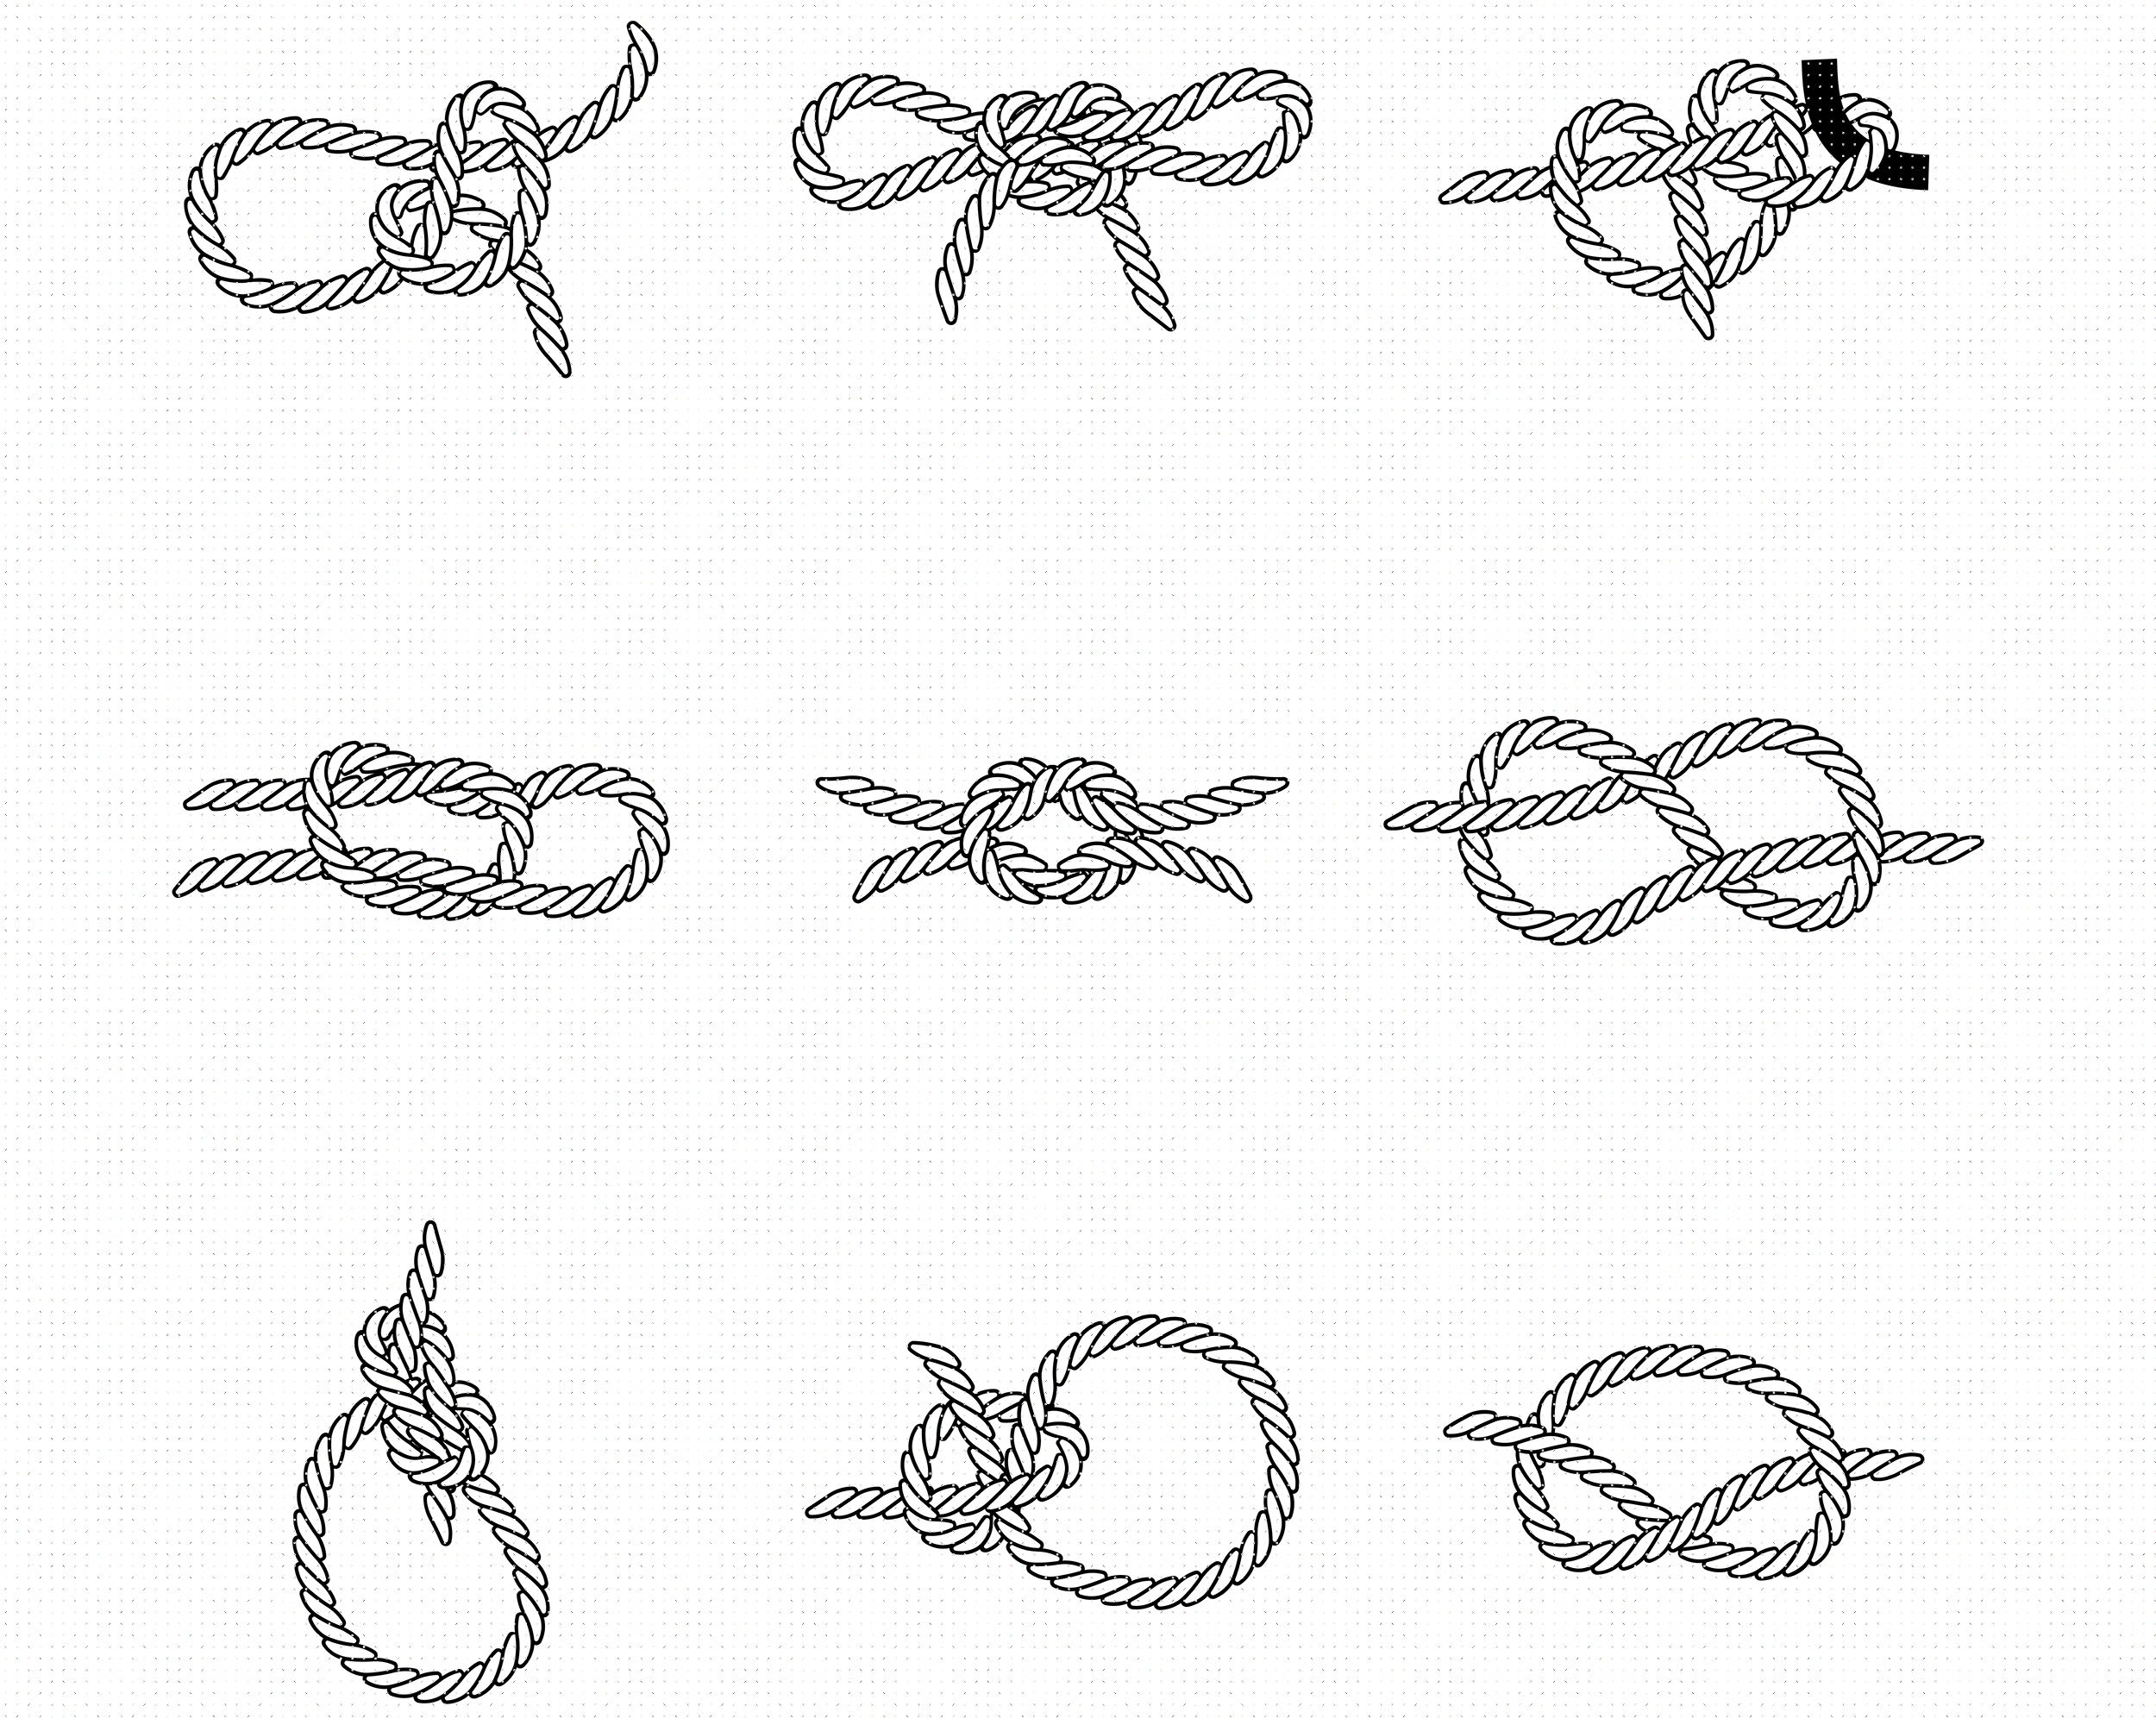 rope knots SVG, knot types PNG, DXF, clipart, EPS, vector By CrafterOks